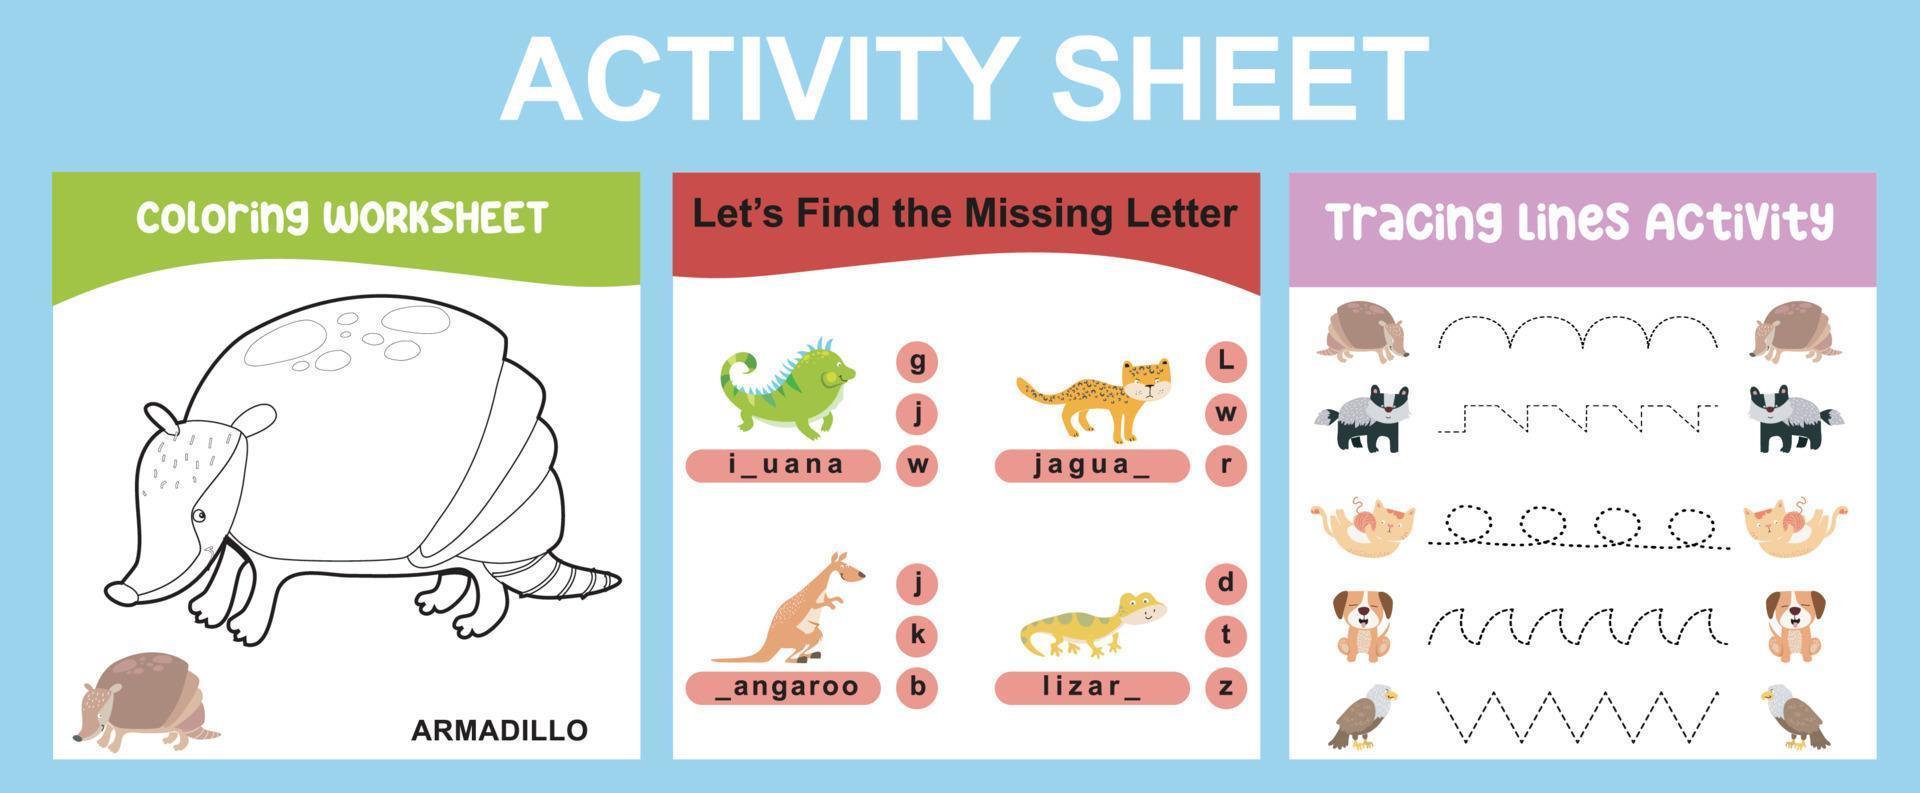 Educational printable worksheet. Activity sheet for children with animal theme. Coloring sheet, find the missing letter, and tracing activity. Vector illustrations.